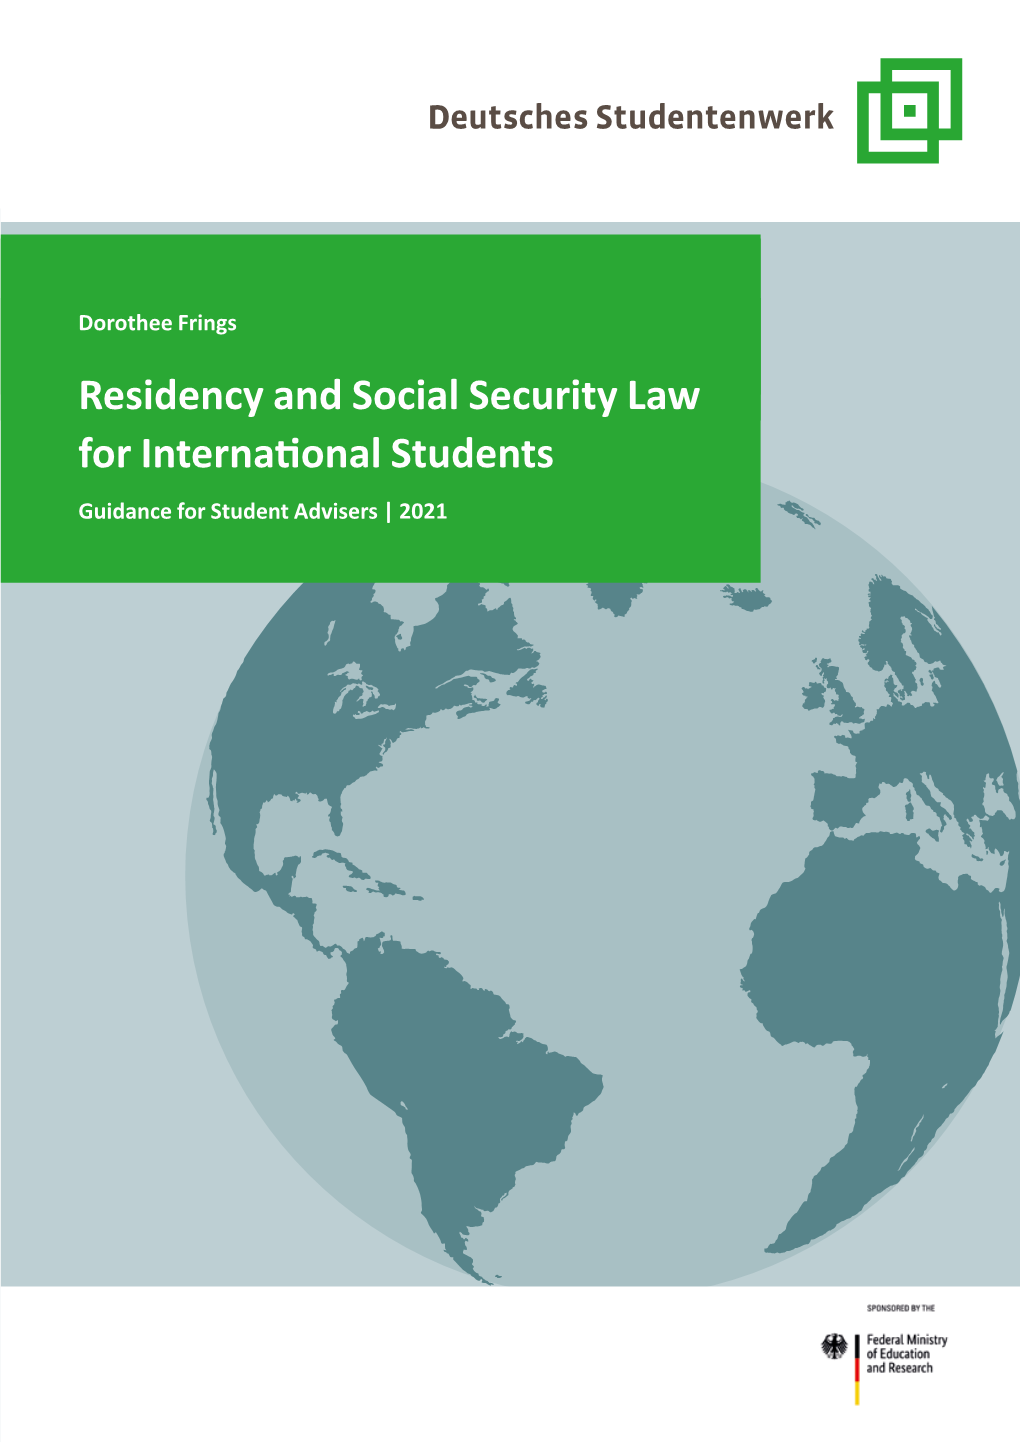 Residency and Social Security Law for International Students